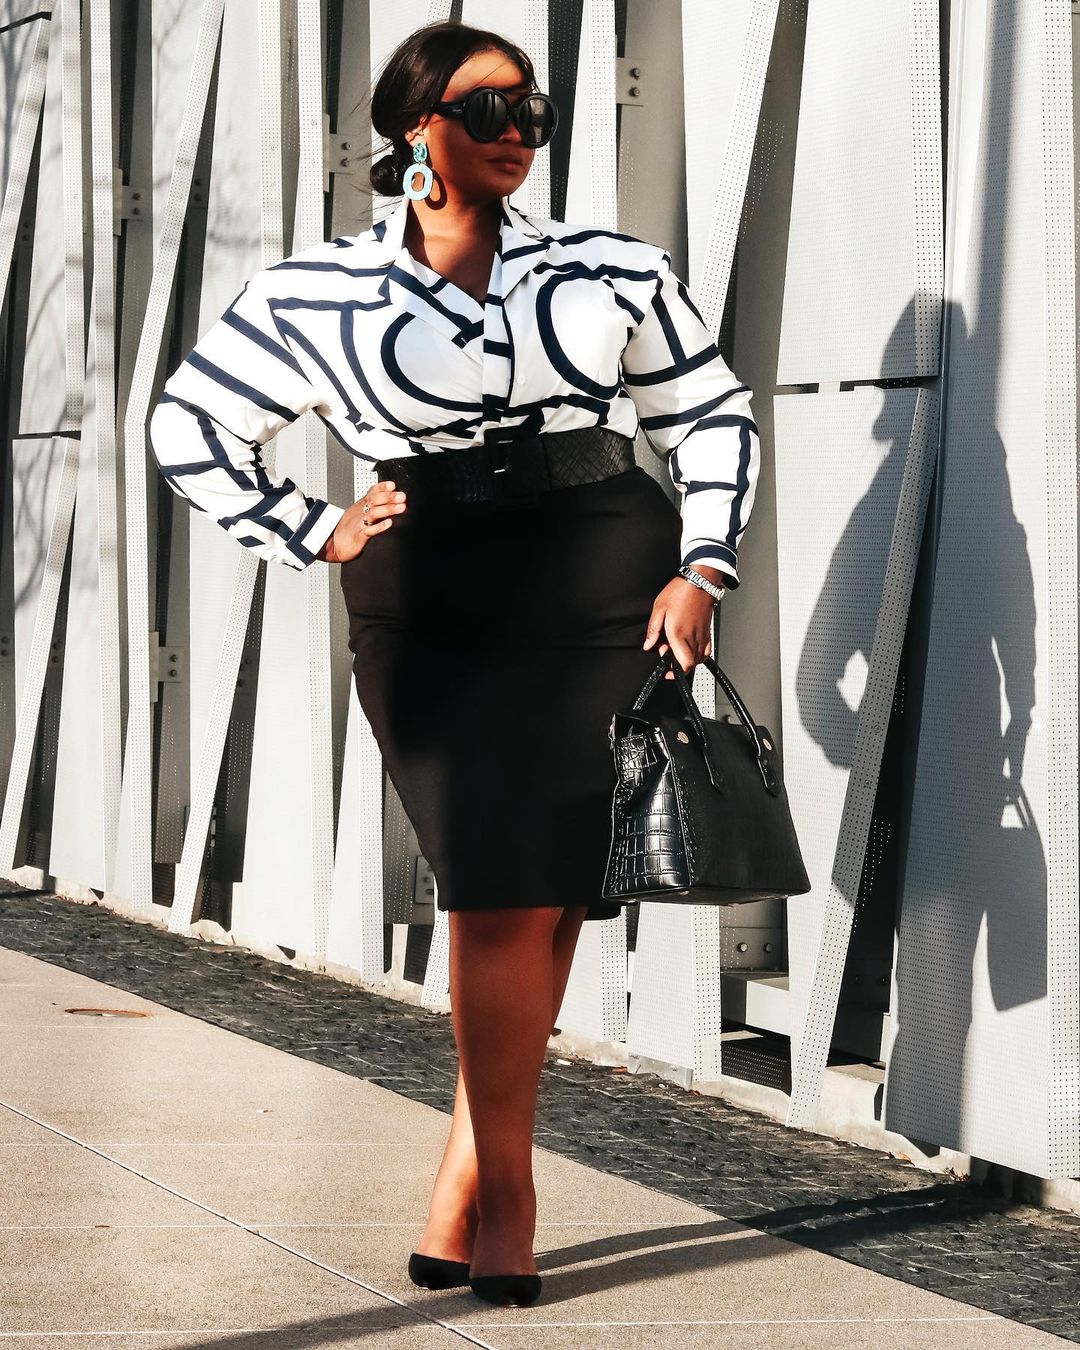 plus size interview outfits